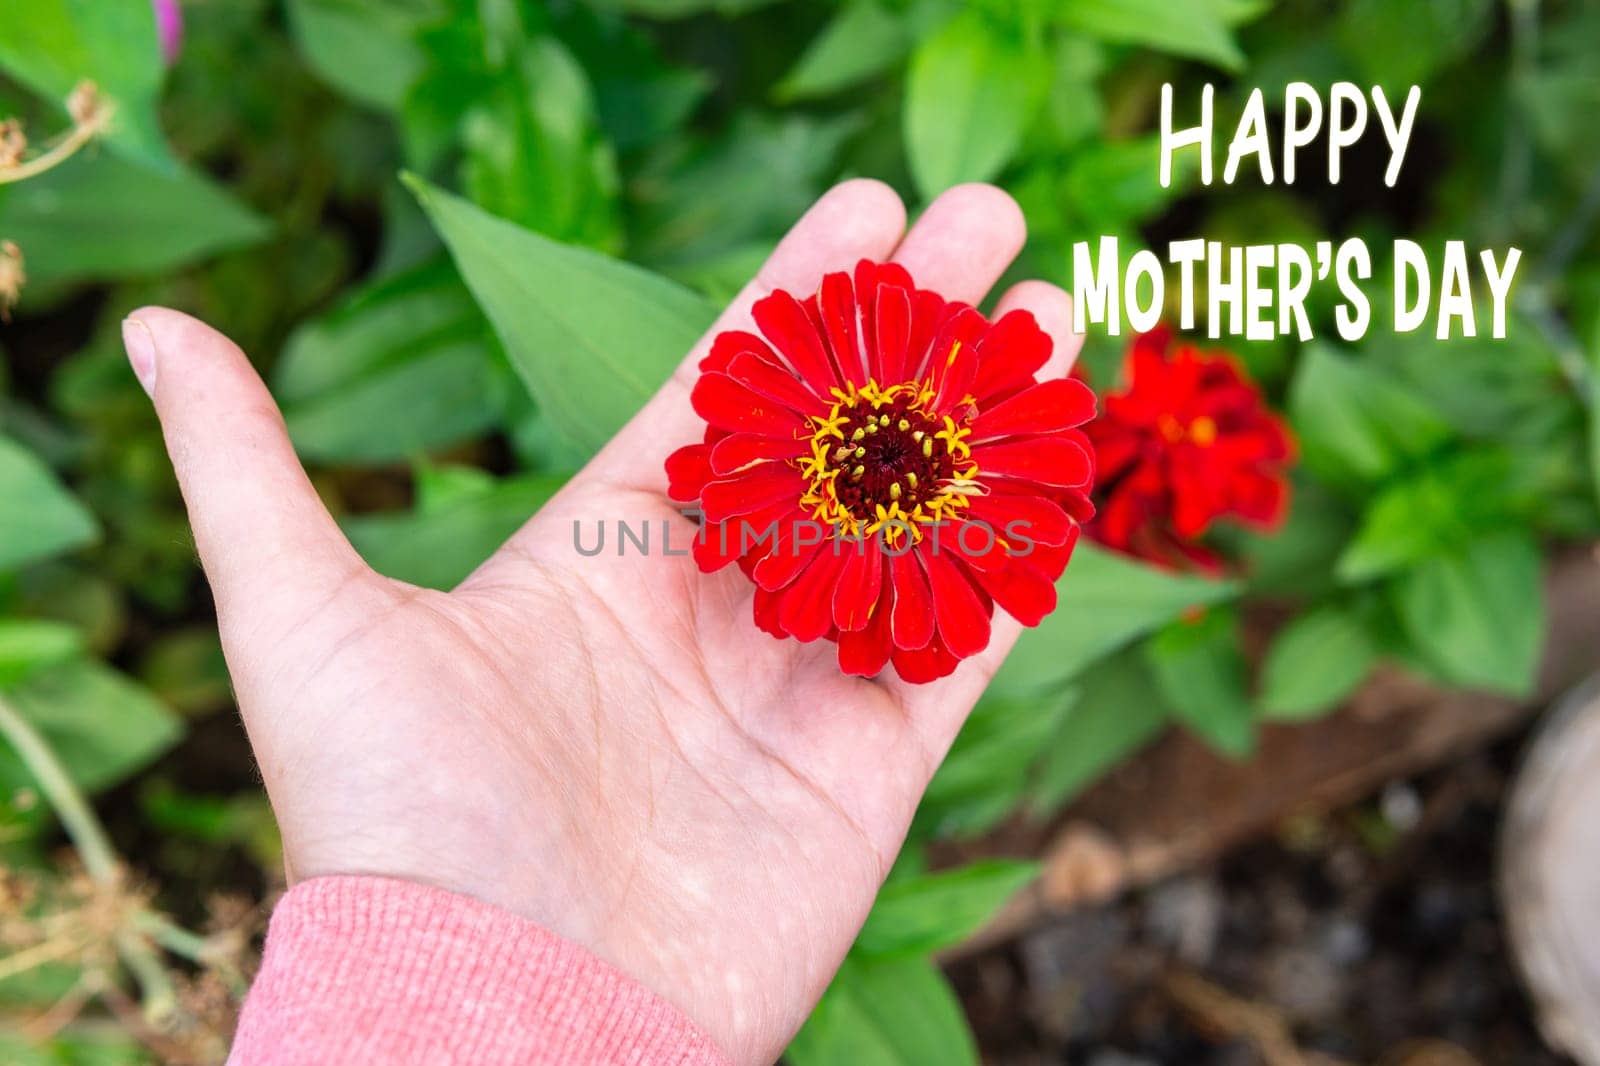 Celebrating Mothers Day With A Delicate red Zinnia Flower In A Loving Hand